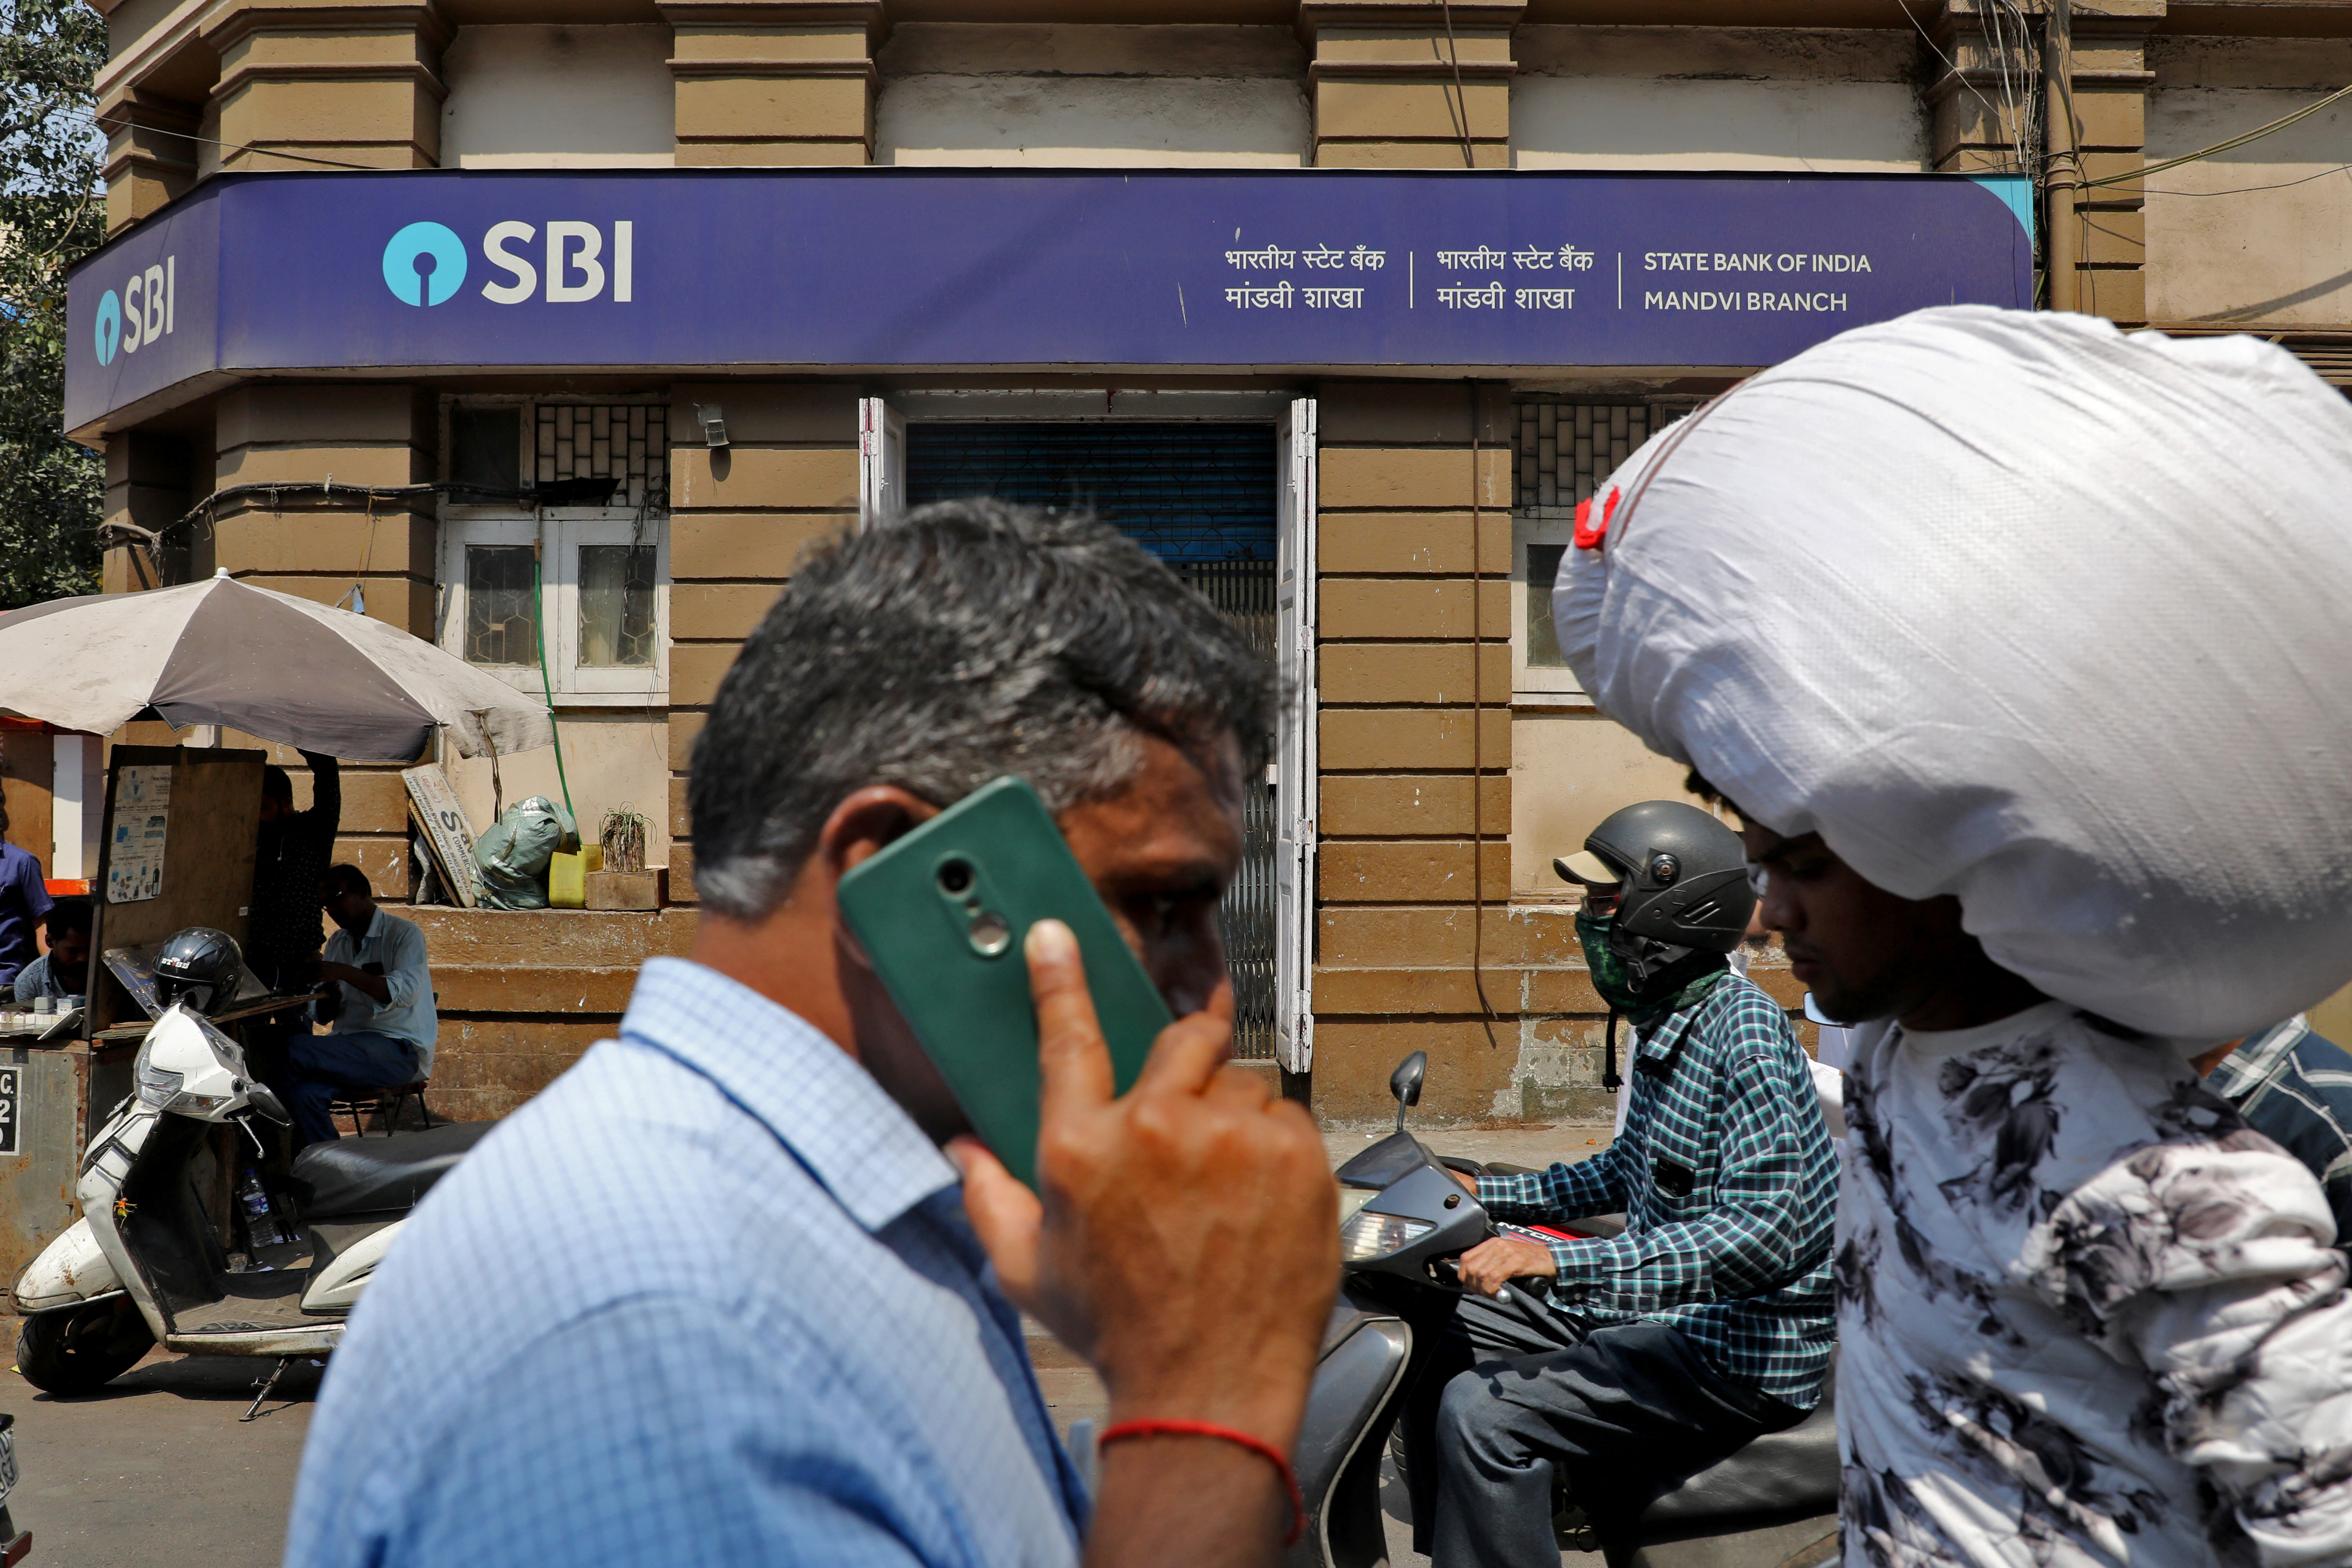 People move past a branch office of SBI in Mumbai